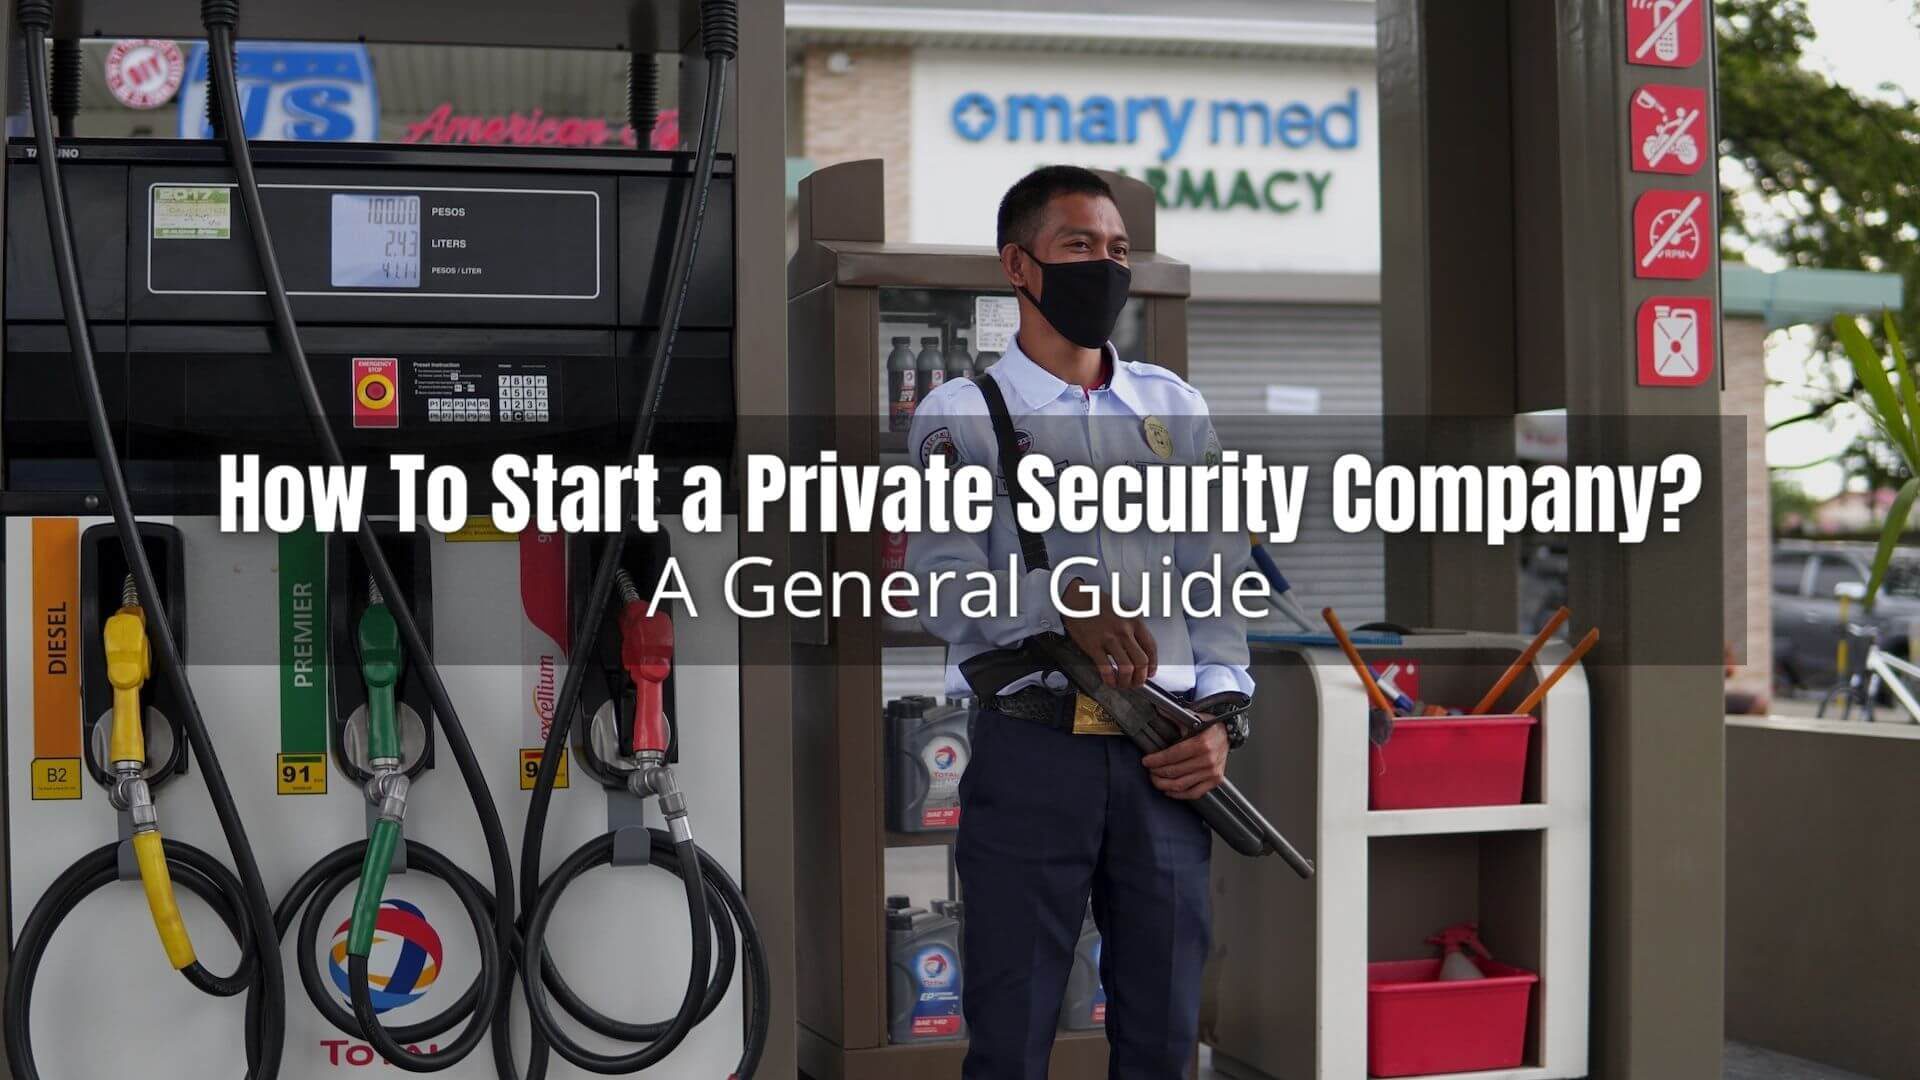 Starting a private security company can be an exciting venture. Here's an overview of the process on how to start a private security company,